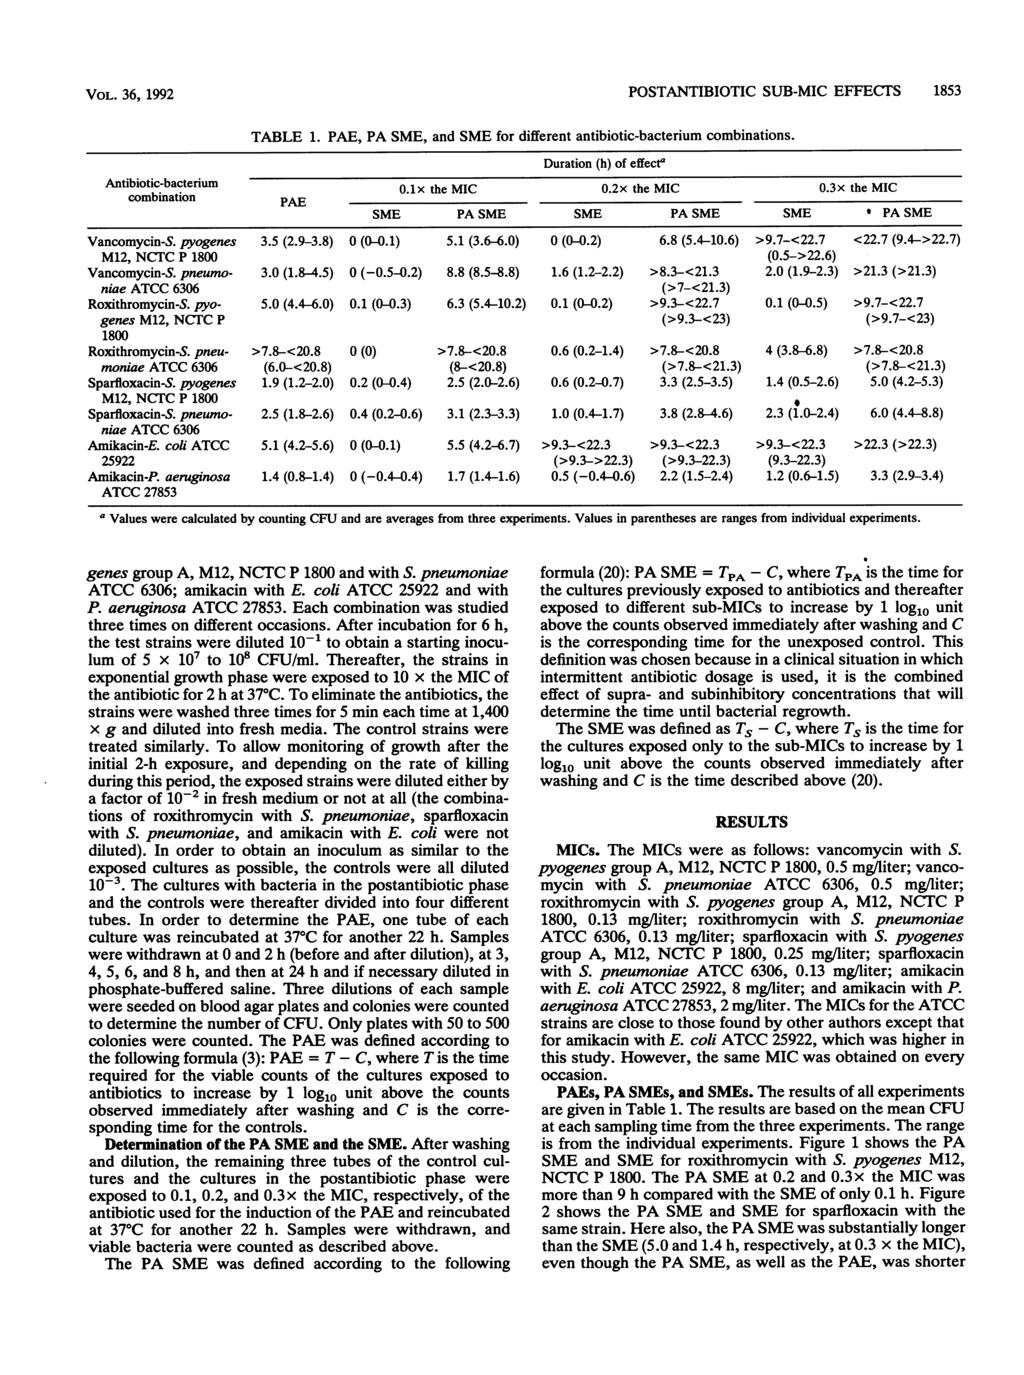 VOL. 36, 1992 POSTANTIBIOTIC SUB-MIC EFFECTS 1853 TABLE 1. PAE, PA SME, nd SME for different ntiiotic-cterium comintions. Durtion (h) of effect' Antiiotic-cterium O.1x the MIC 0.2x the MIC 0.